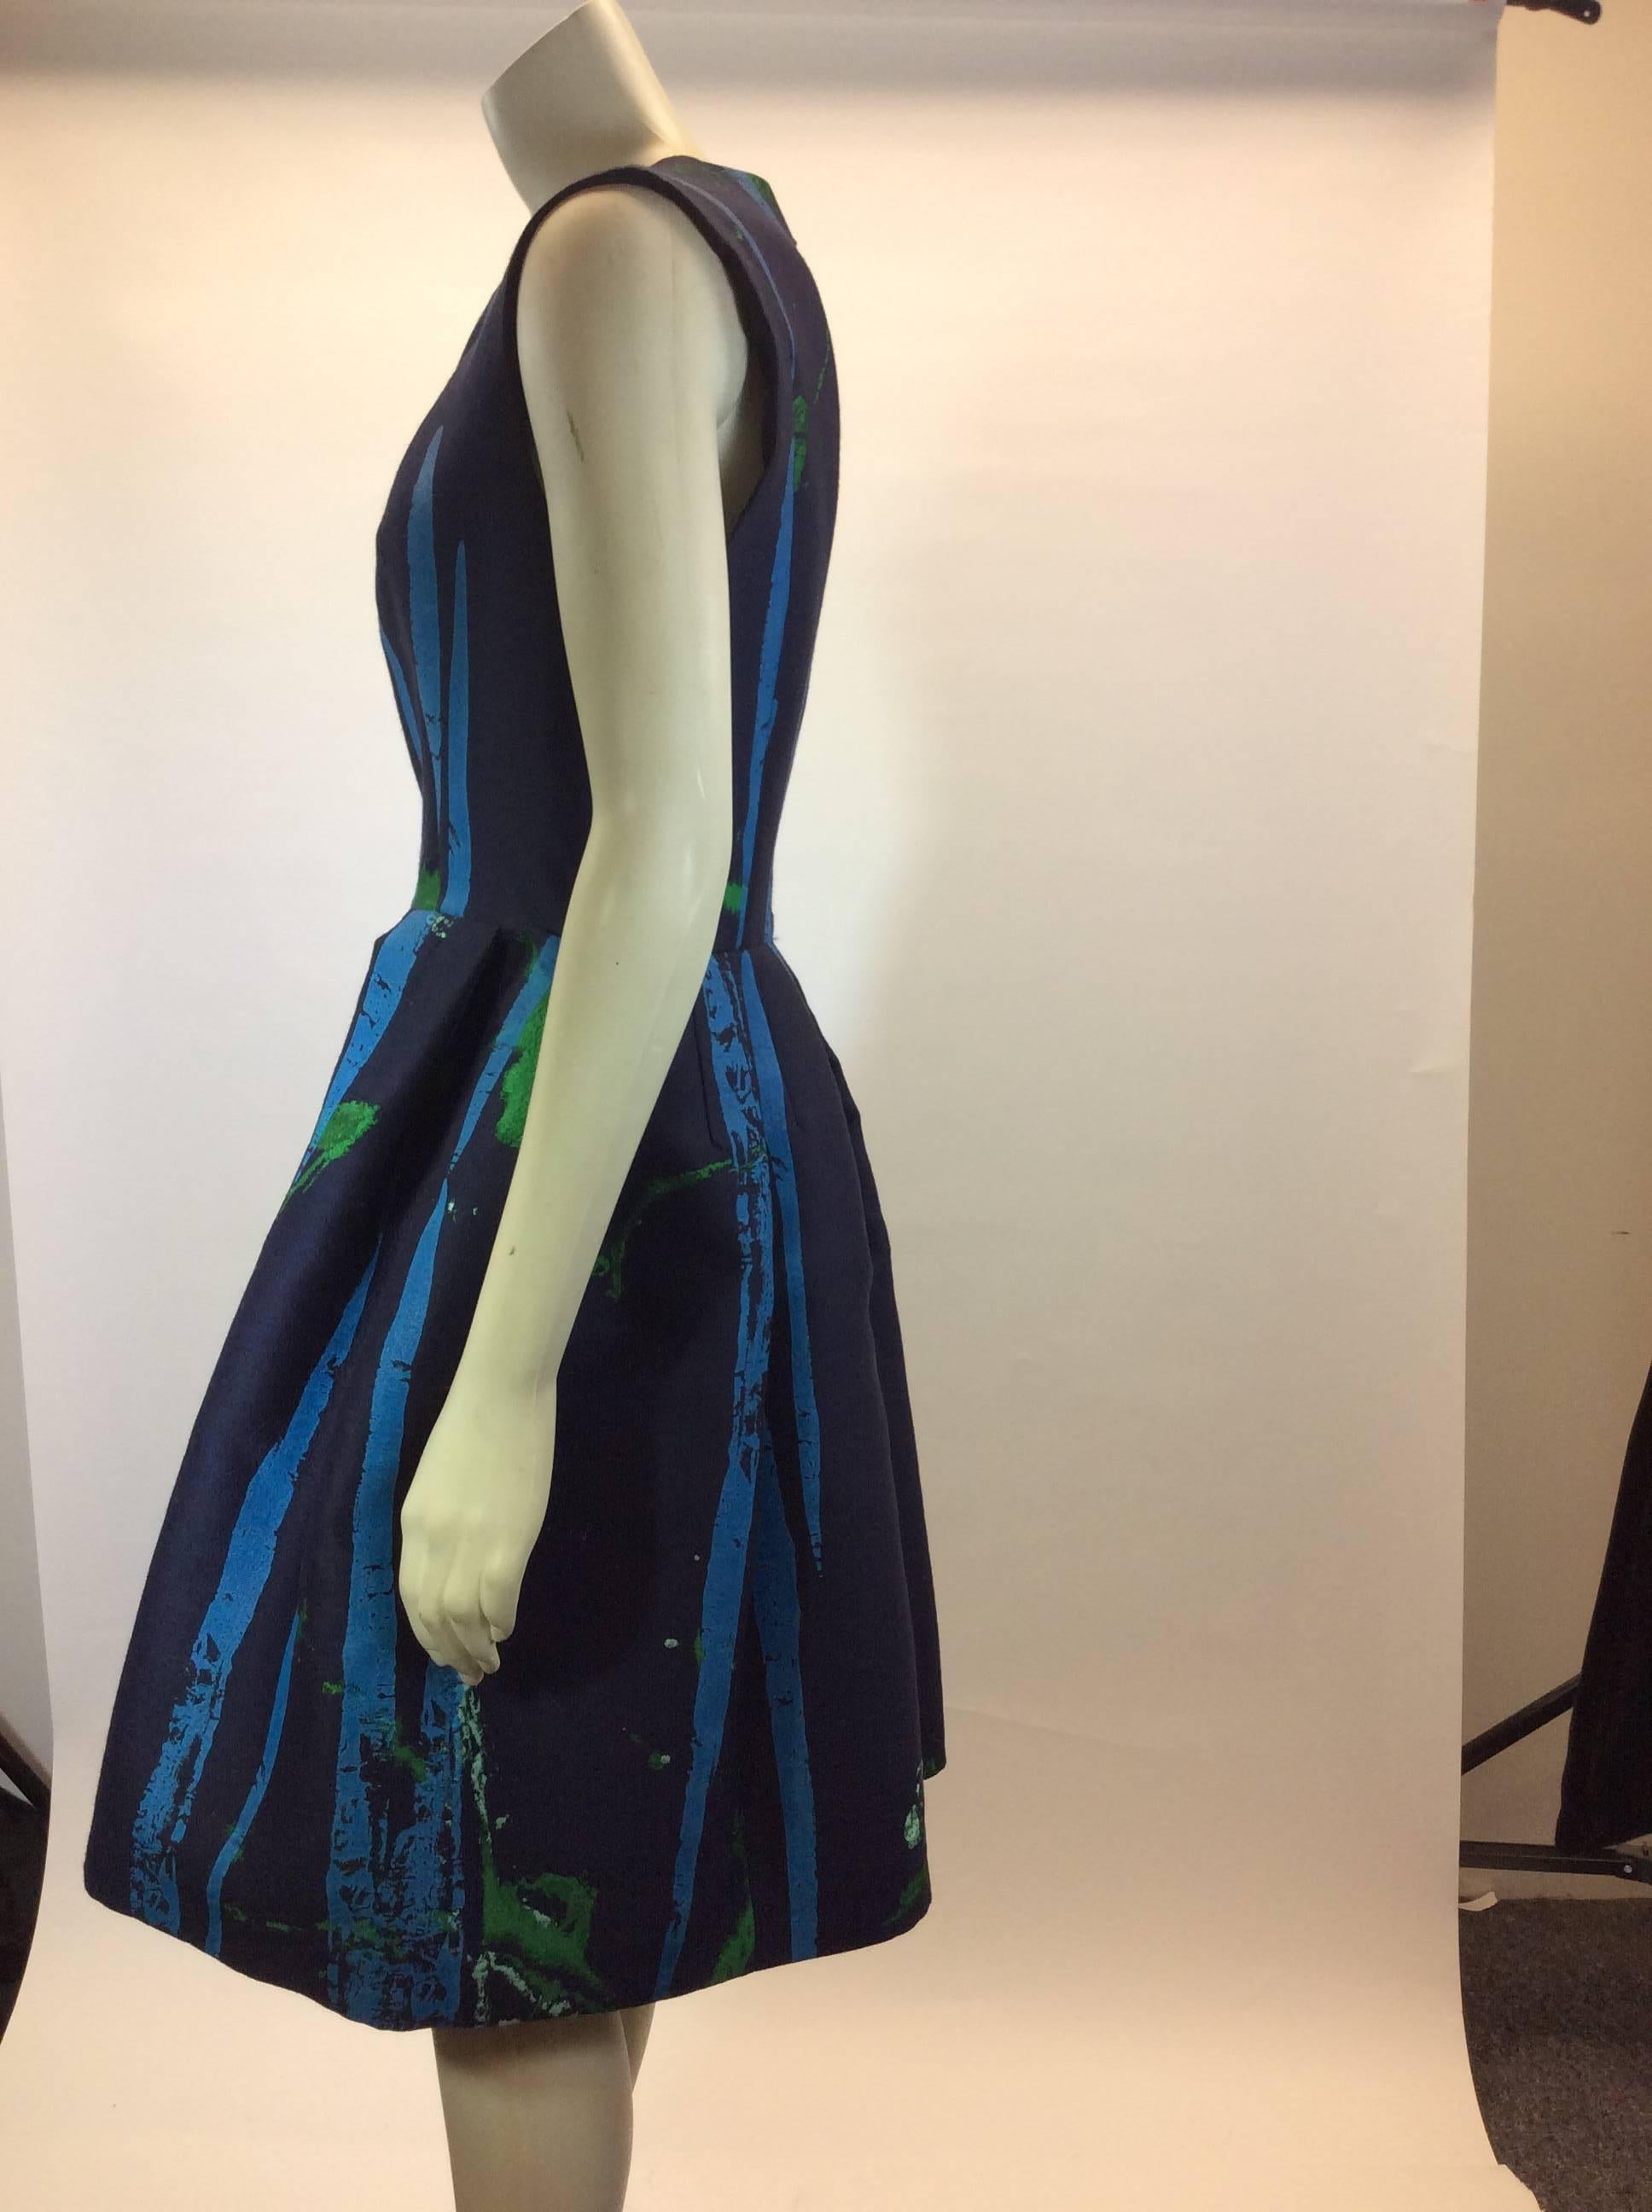 Aquilano Rimondi Dress
-Size 42
-Blue and green hued & textured 
-Polyester & Wool
-Cinched waistline 